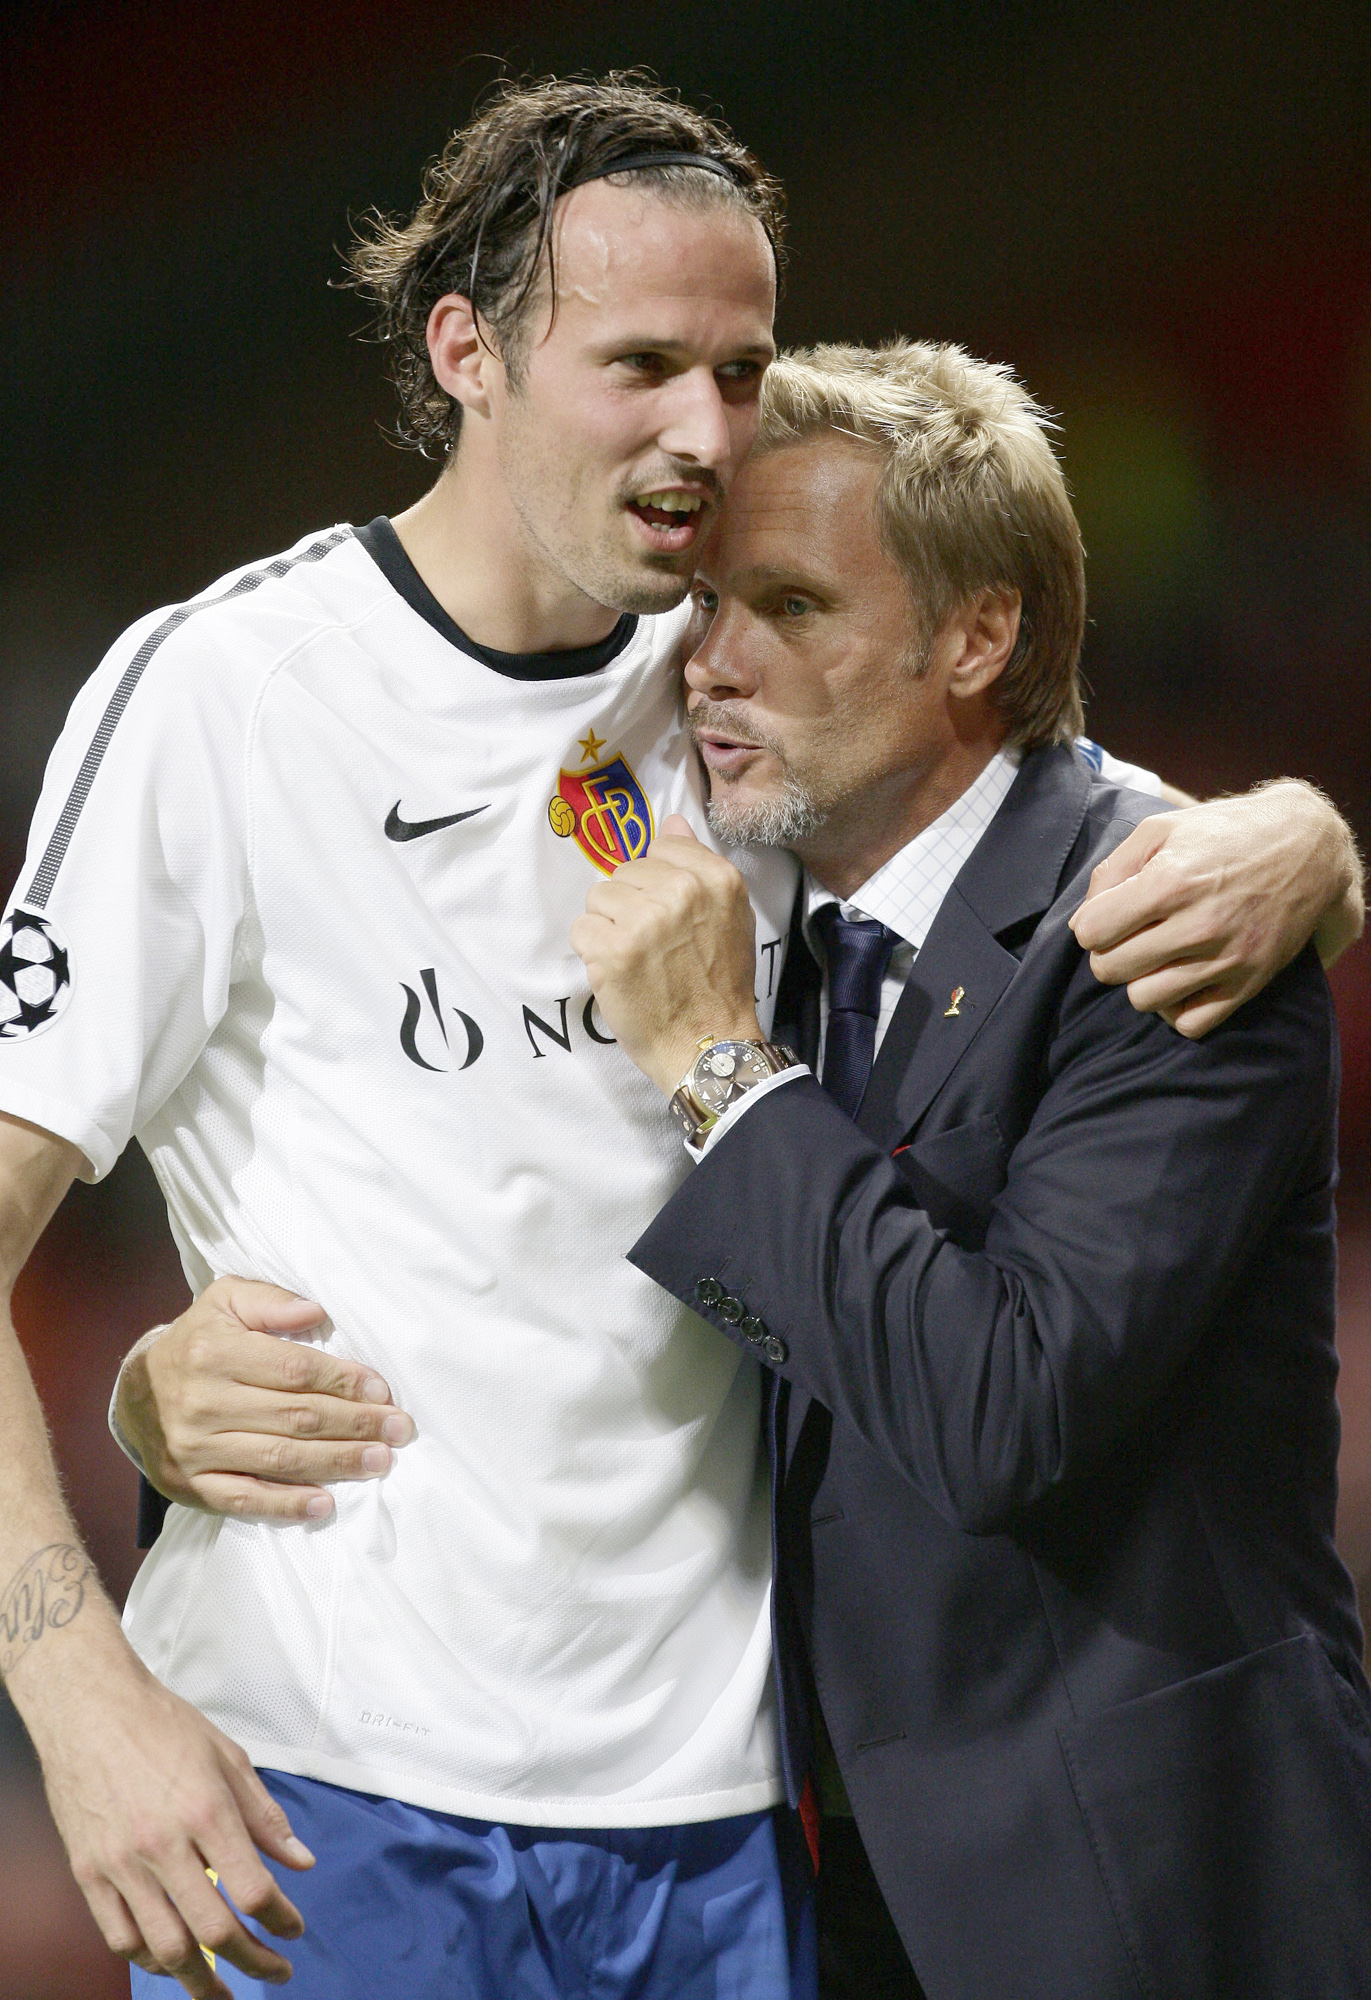 FC Basel manager Thorsten Fink, right, celebrates with Marco Streller after drawing against Manchester United in their Champions League group C soccer match at Old Trafford, Manchester, England, Tuesday Sept. 27, 2011. (AP Photo/Jon Super)